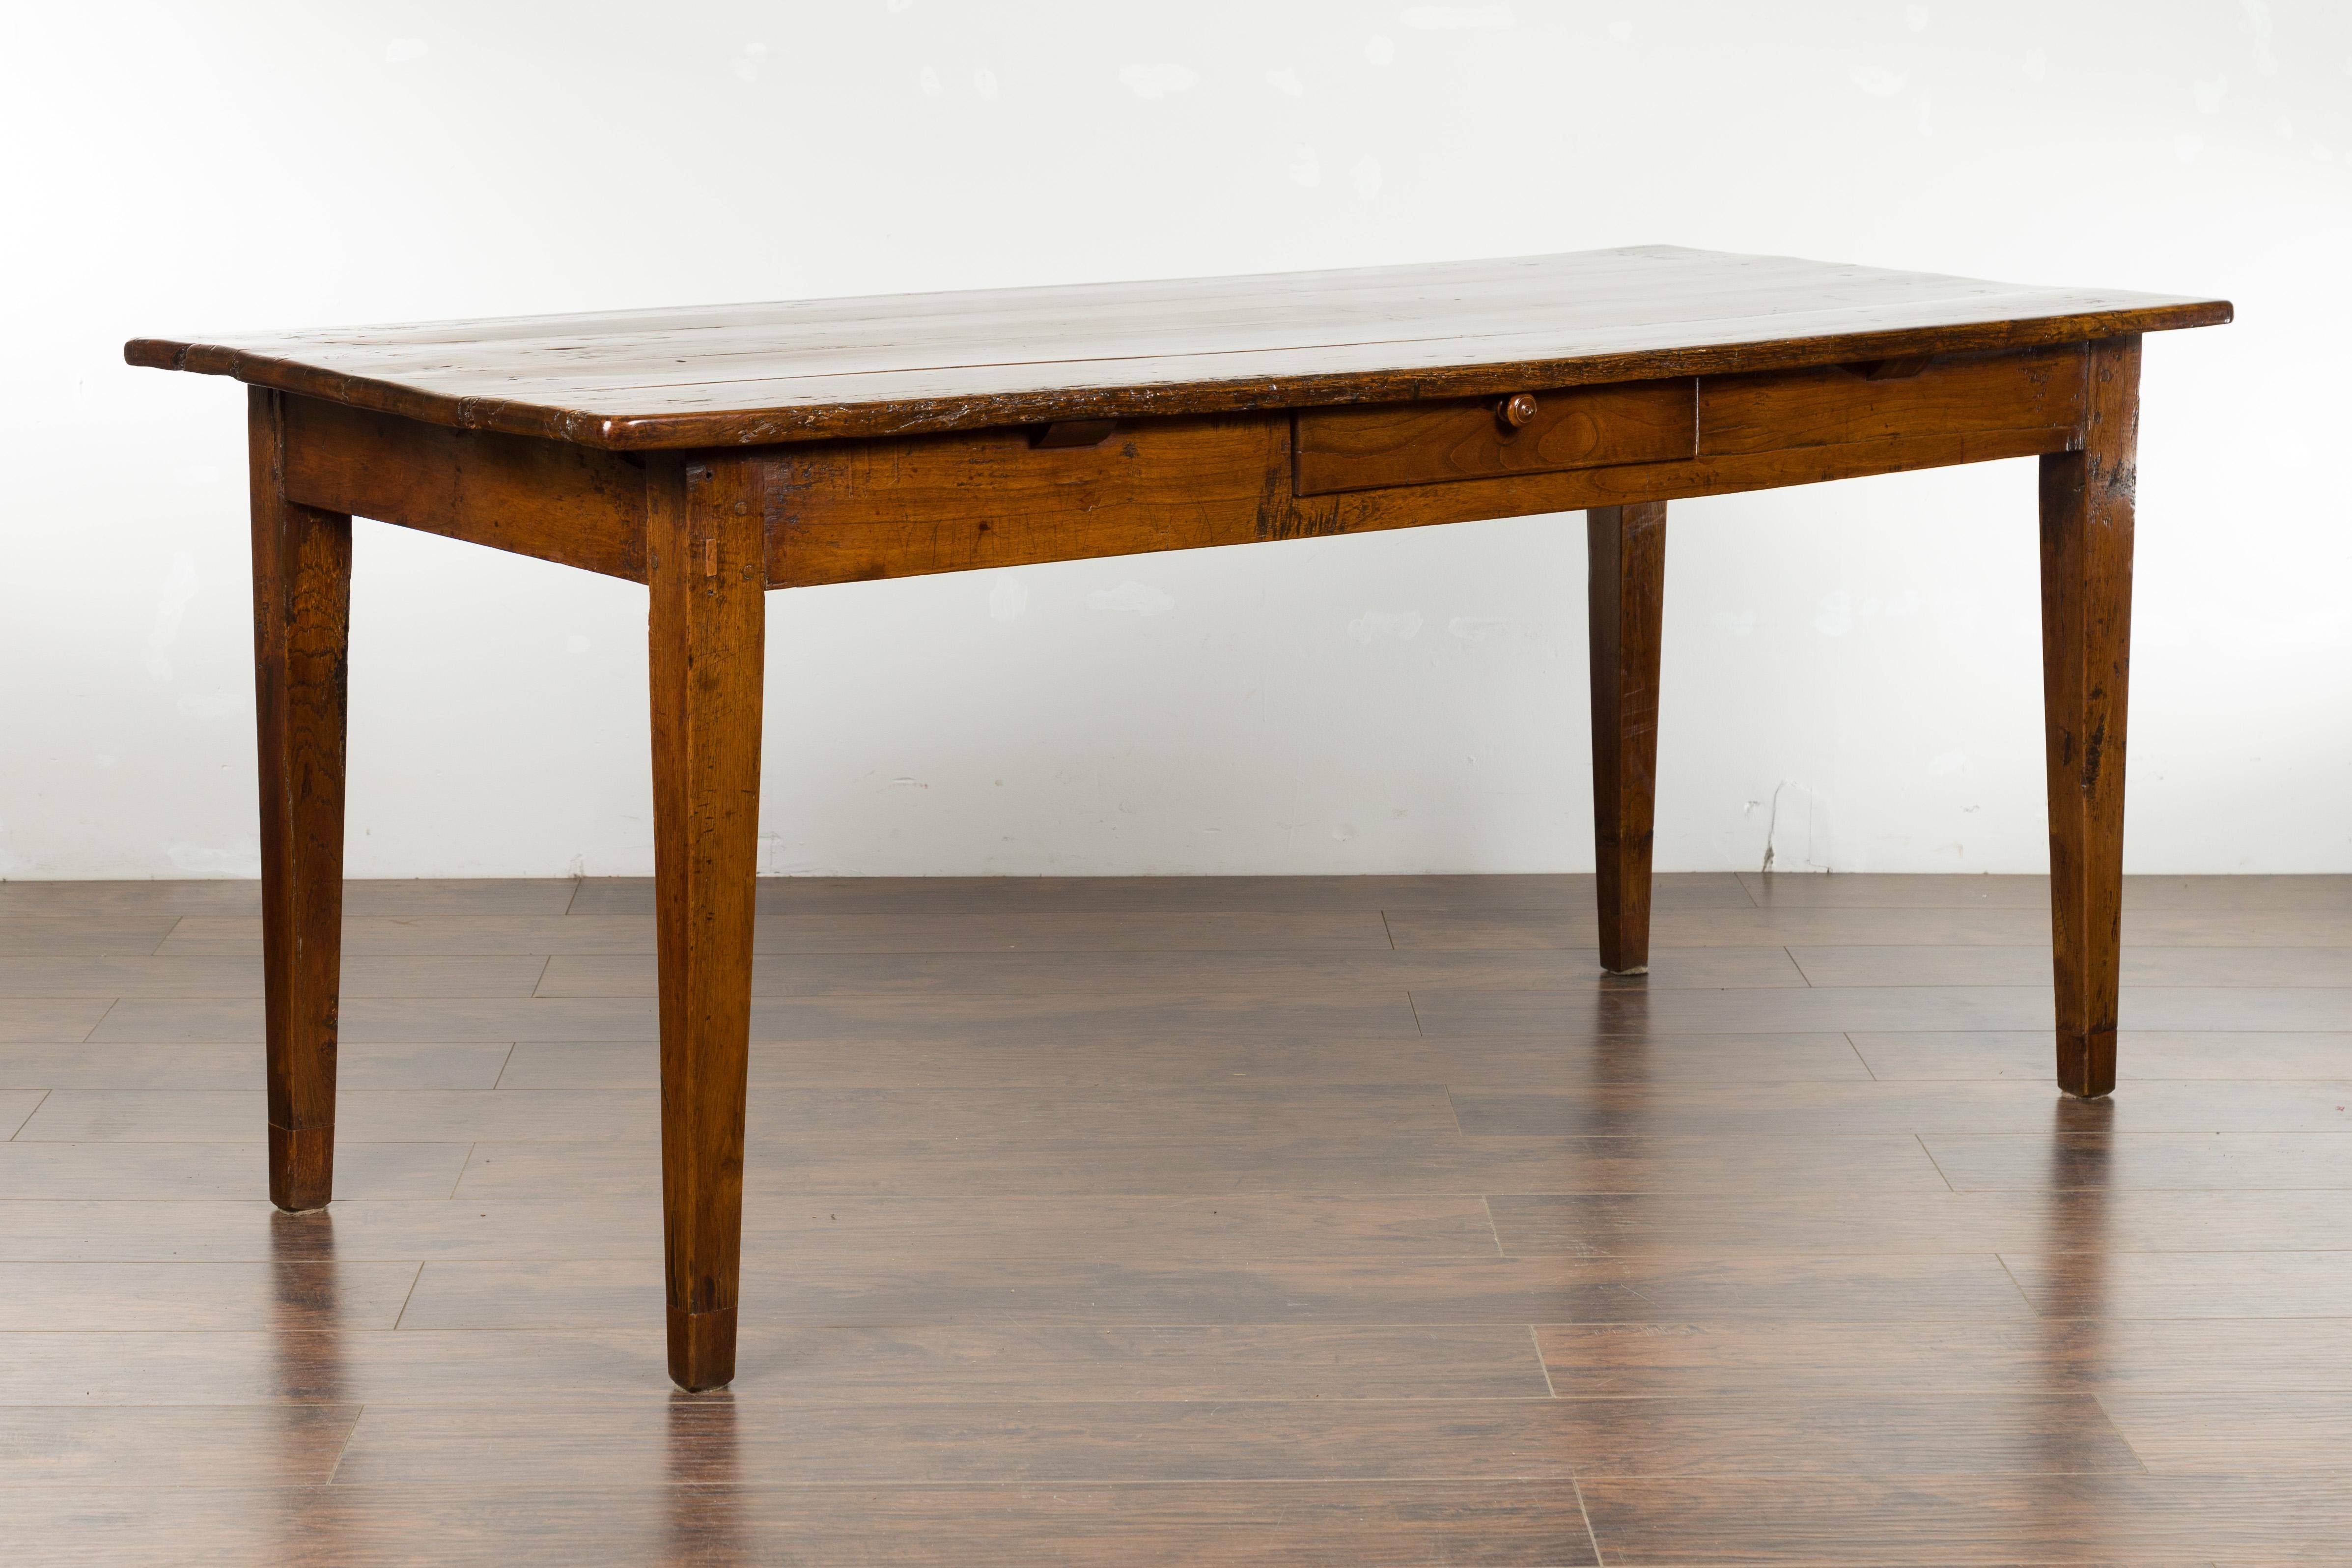 English 1870s Rustic Elm Farm Table with Single Drawer and Tapered Legs 10